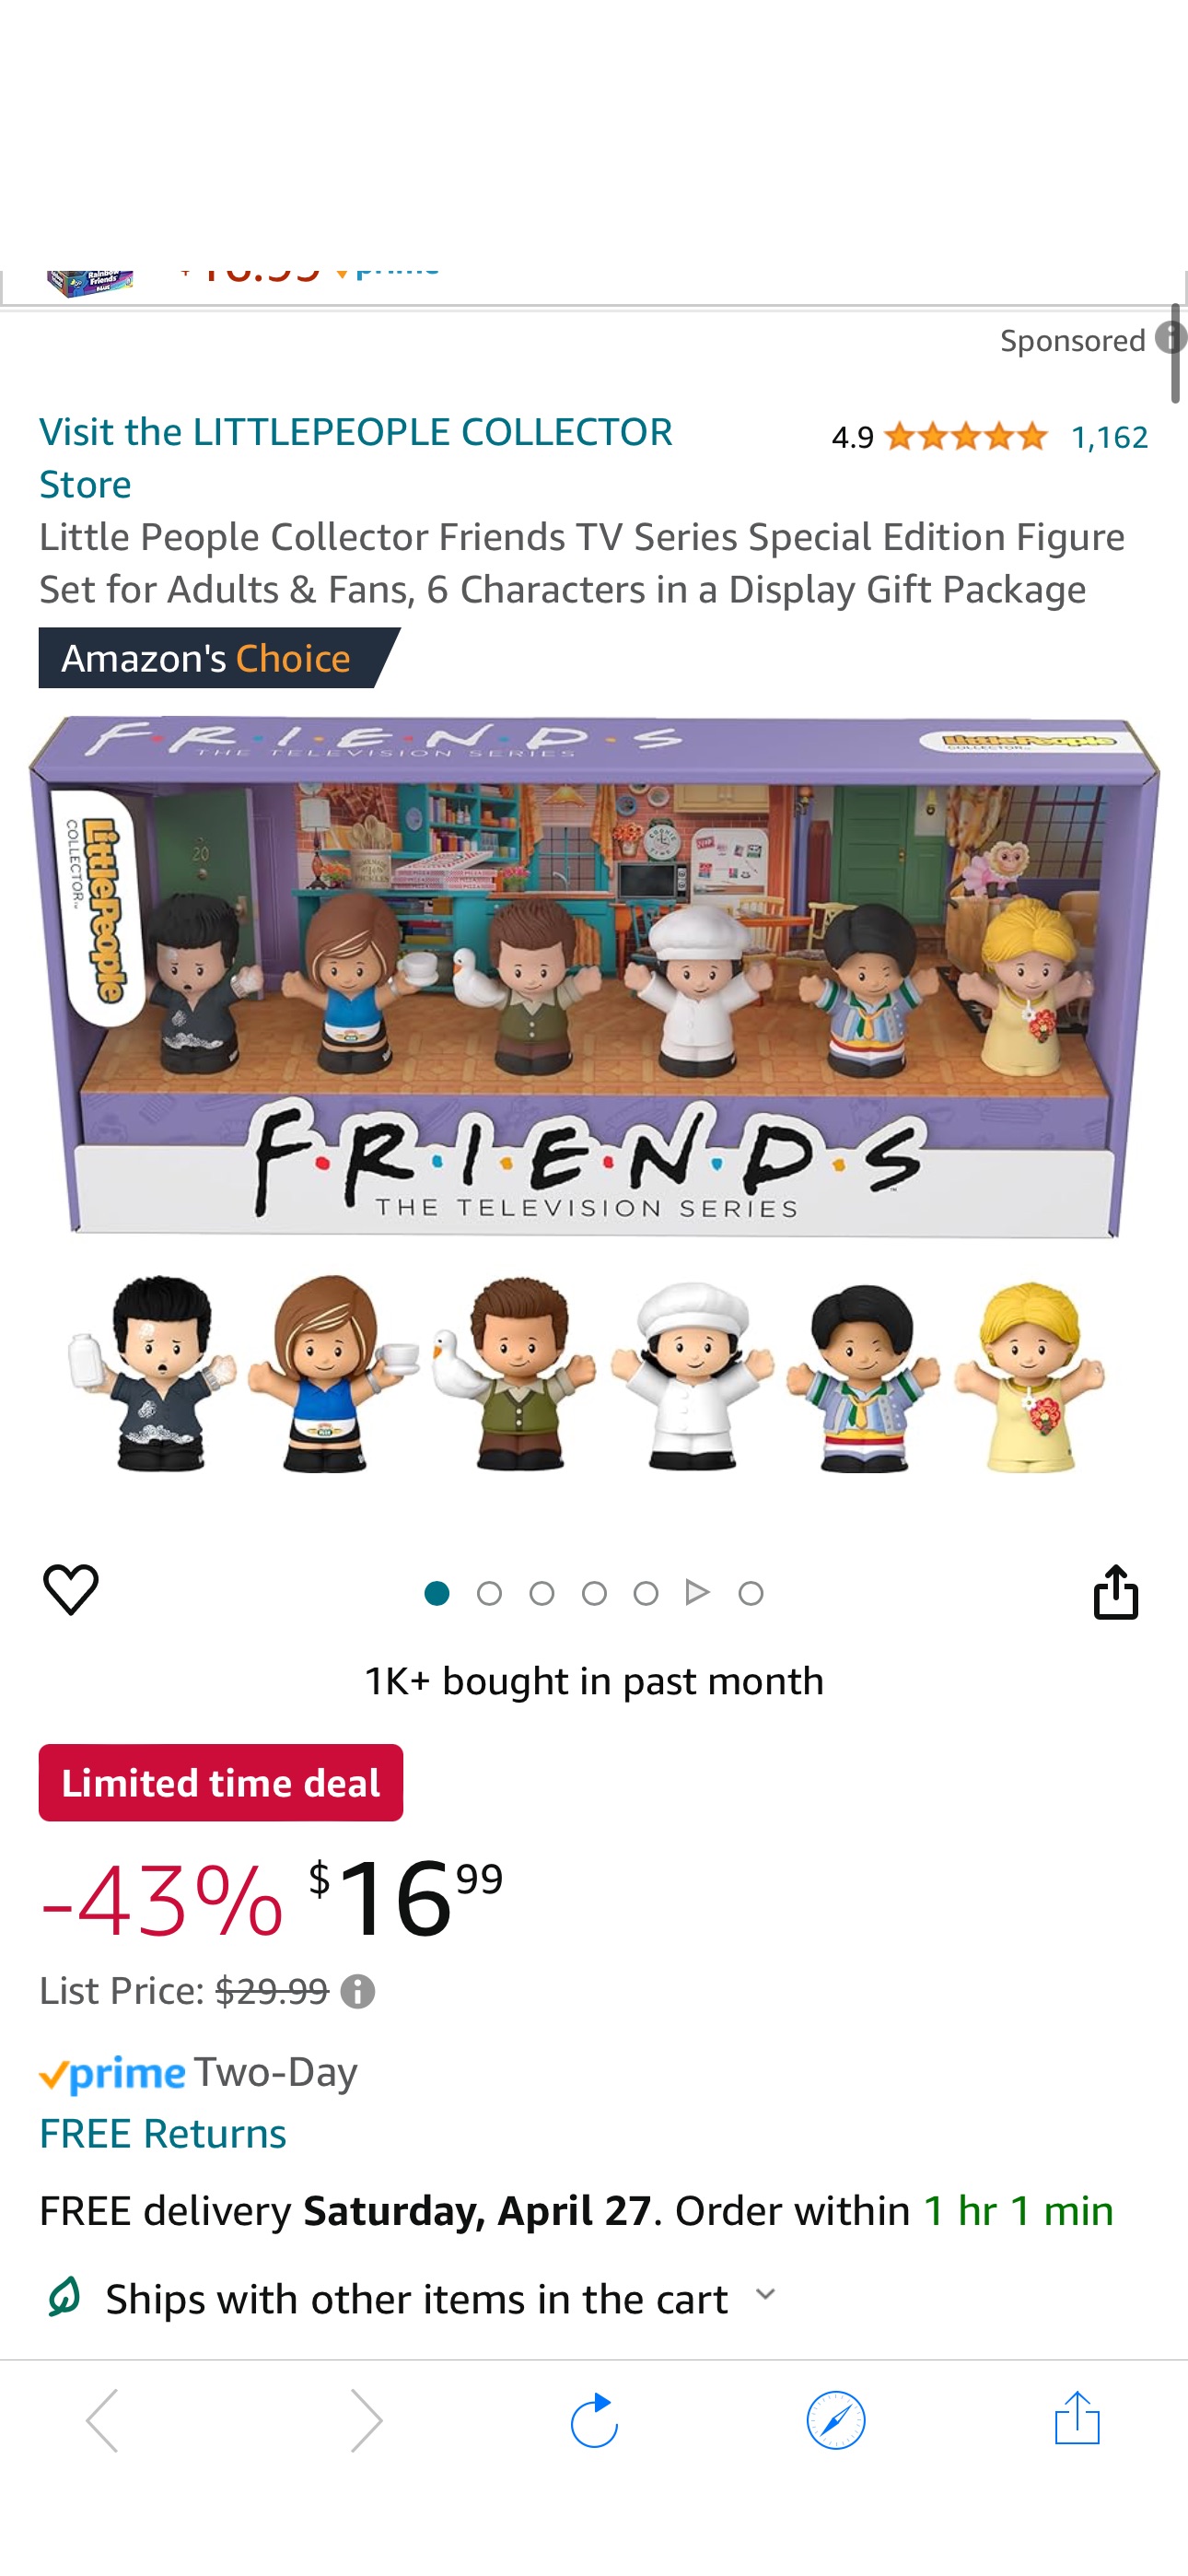 Amazon.com: Little People Collector Friends TV Series Special Edition Figure Set for Adults & Fans, 6 Characters in a Display Gift Package​ : Toys & Games